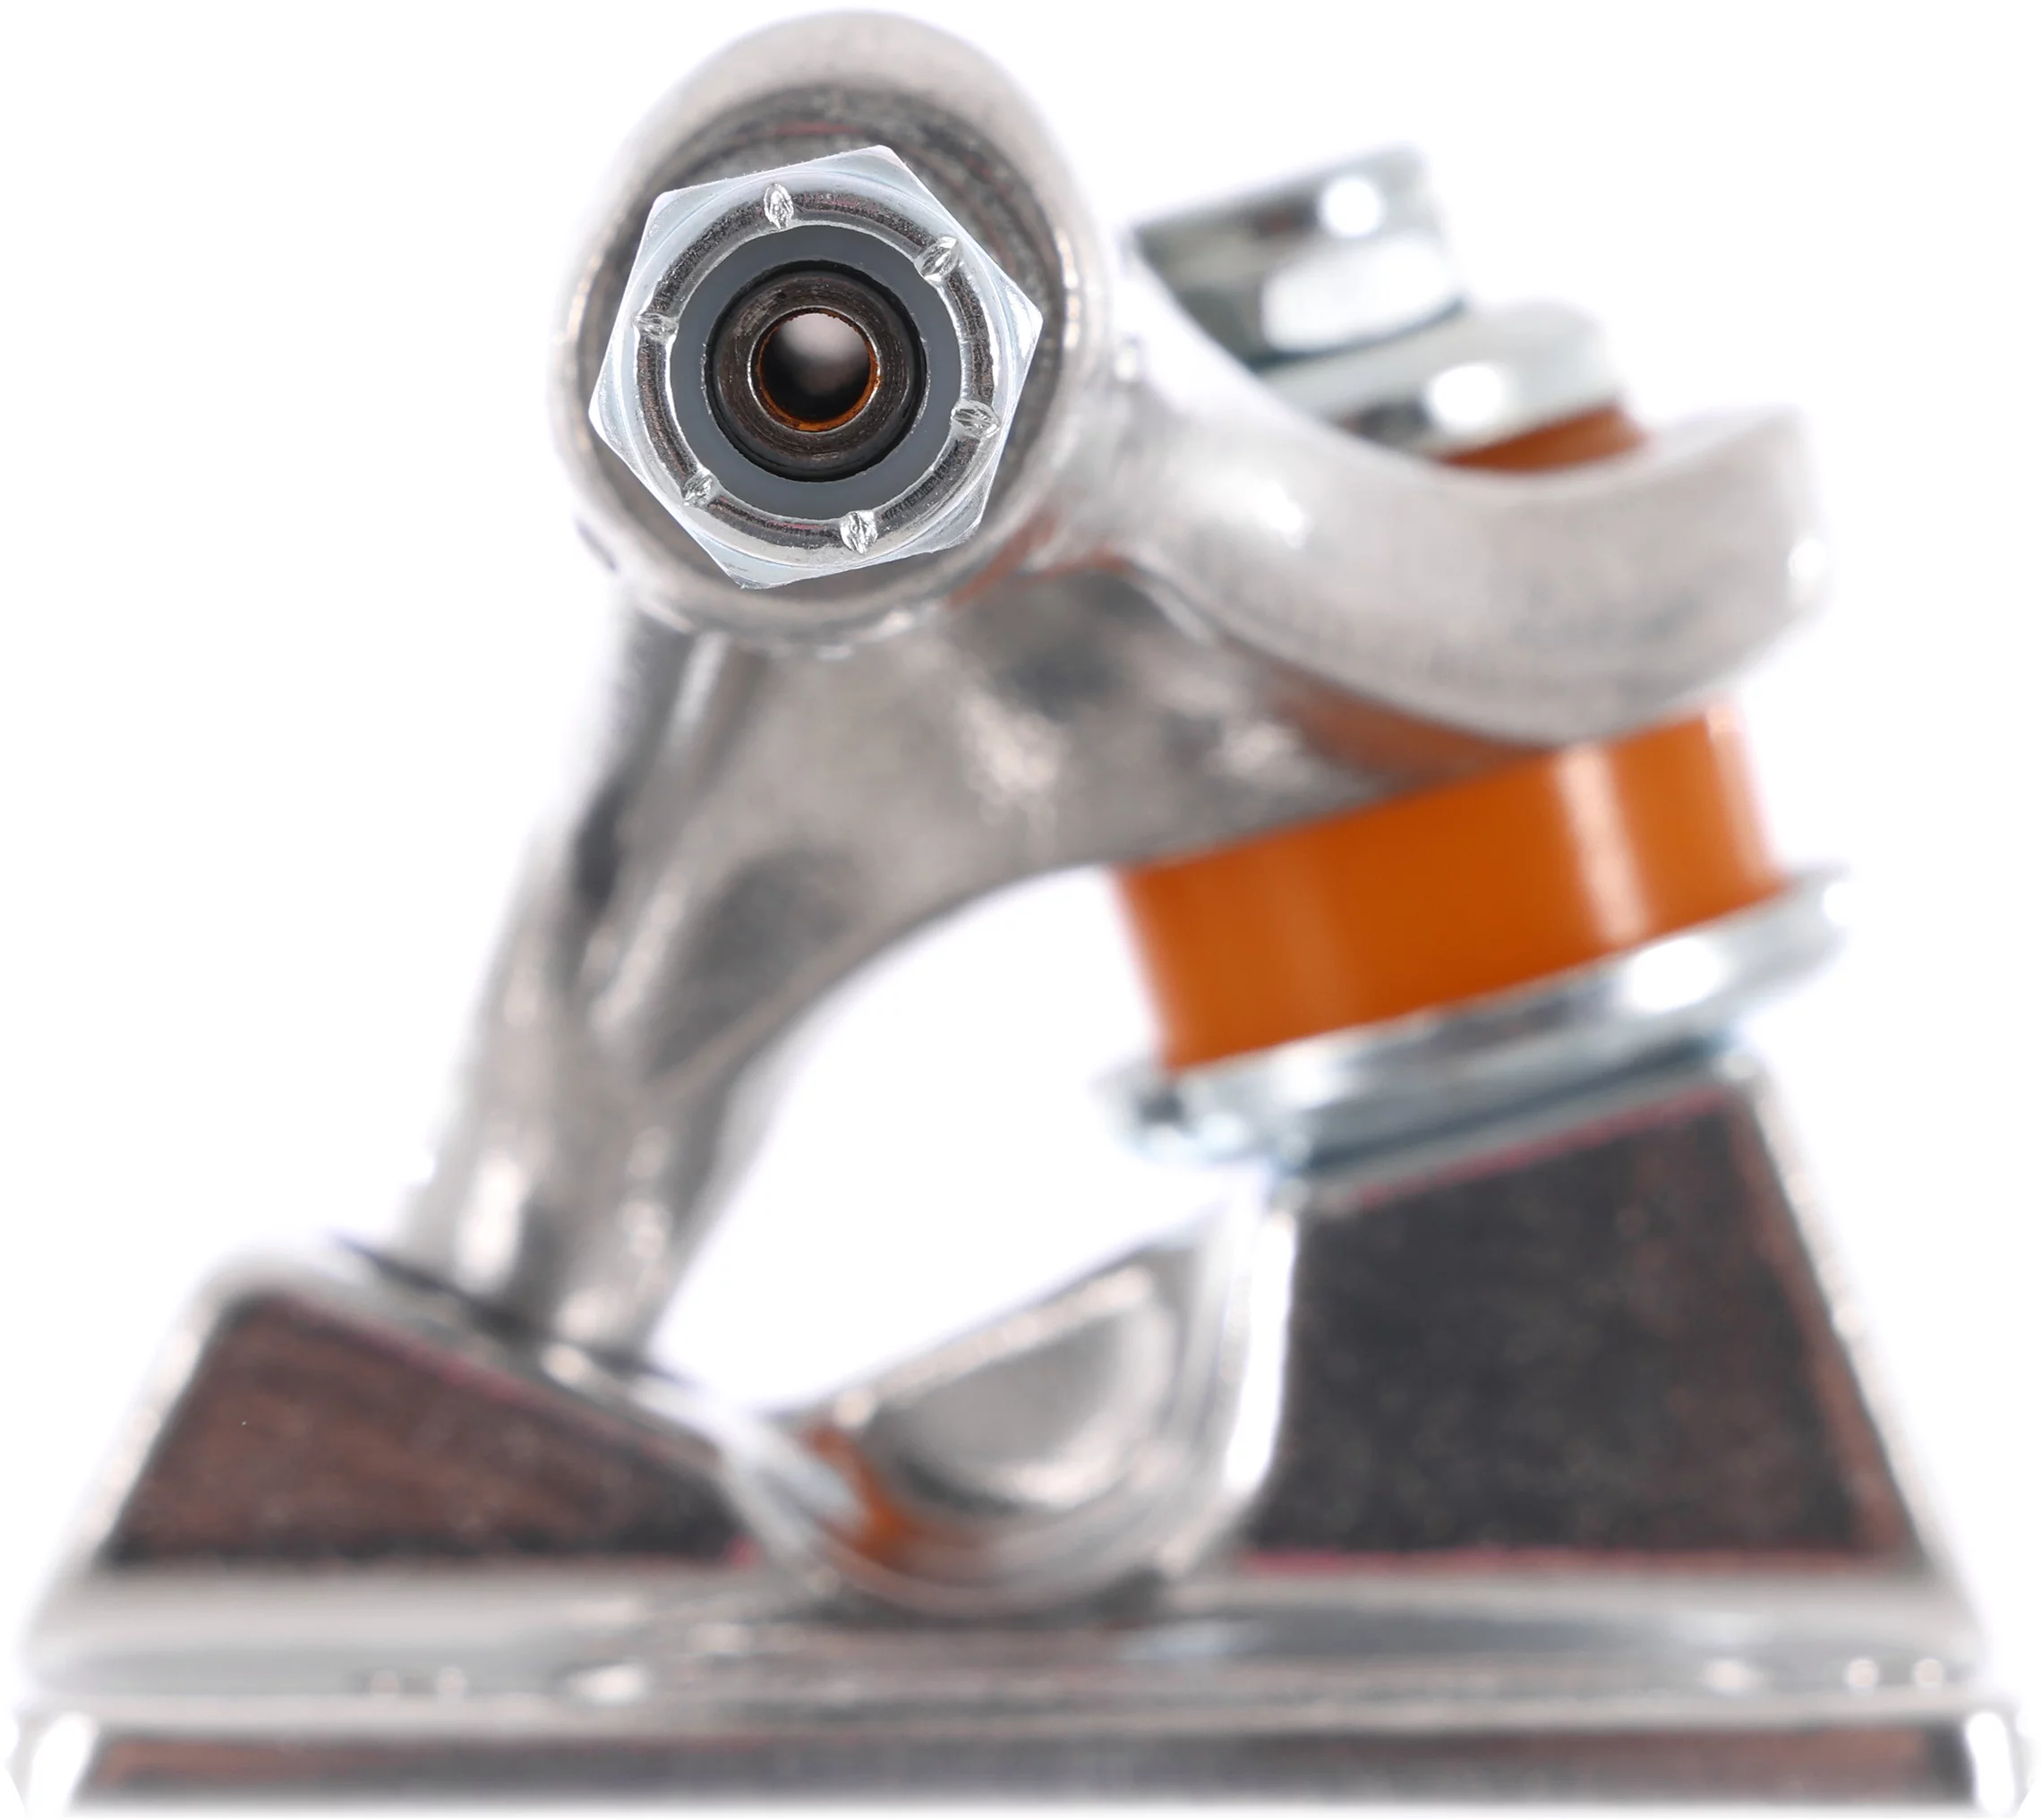 Independent Forged Hollow Stage 11 Skateboard Trucks - silver 129 